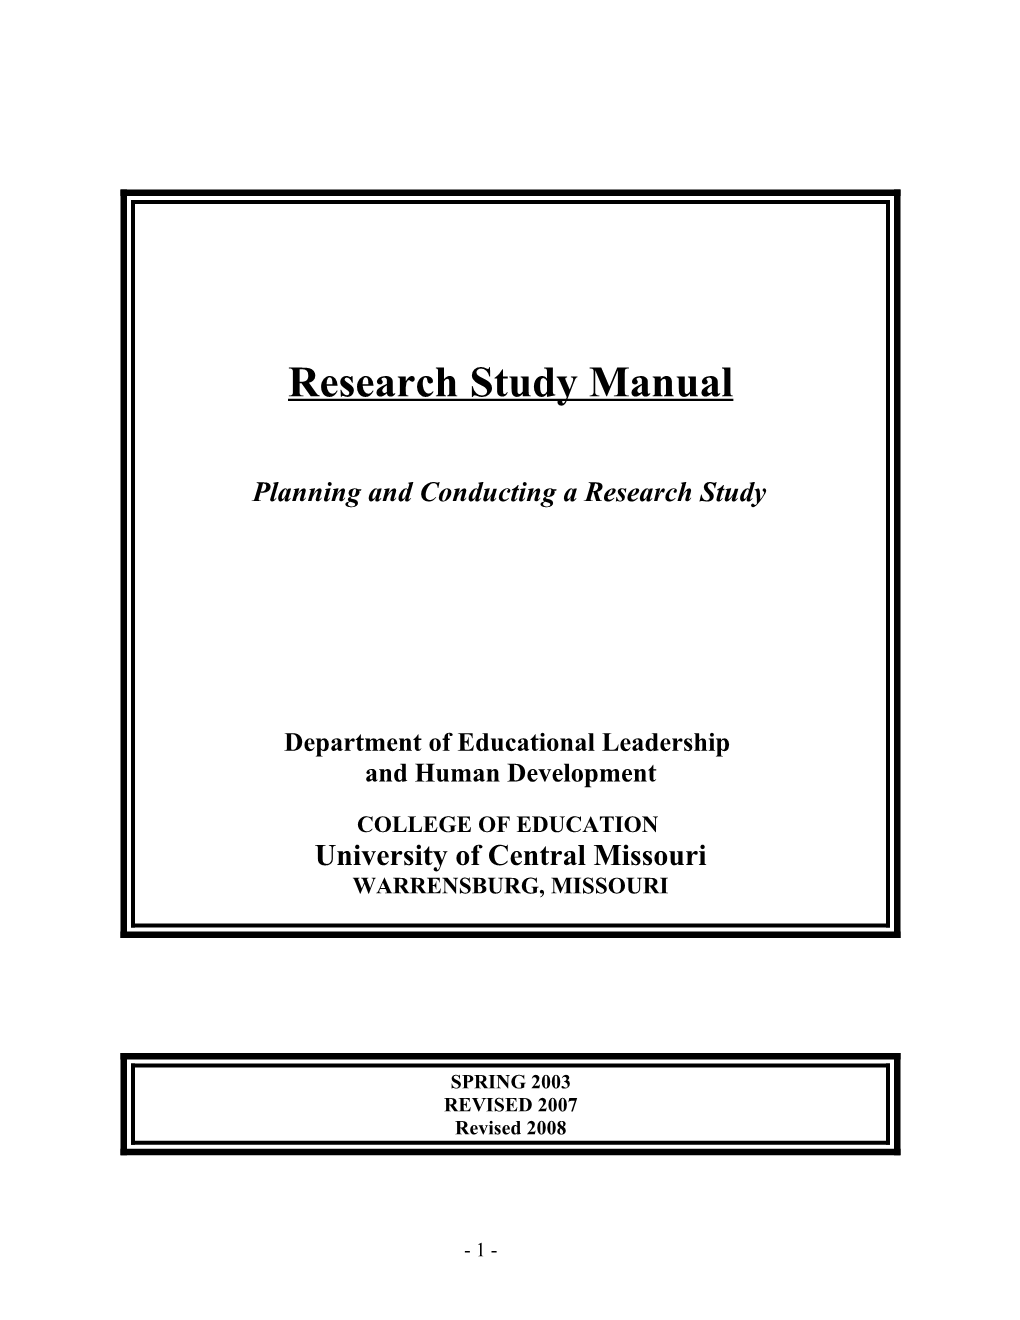 Research Study Manual